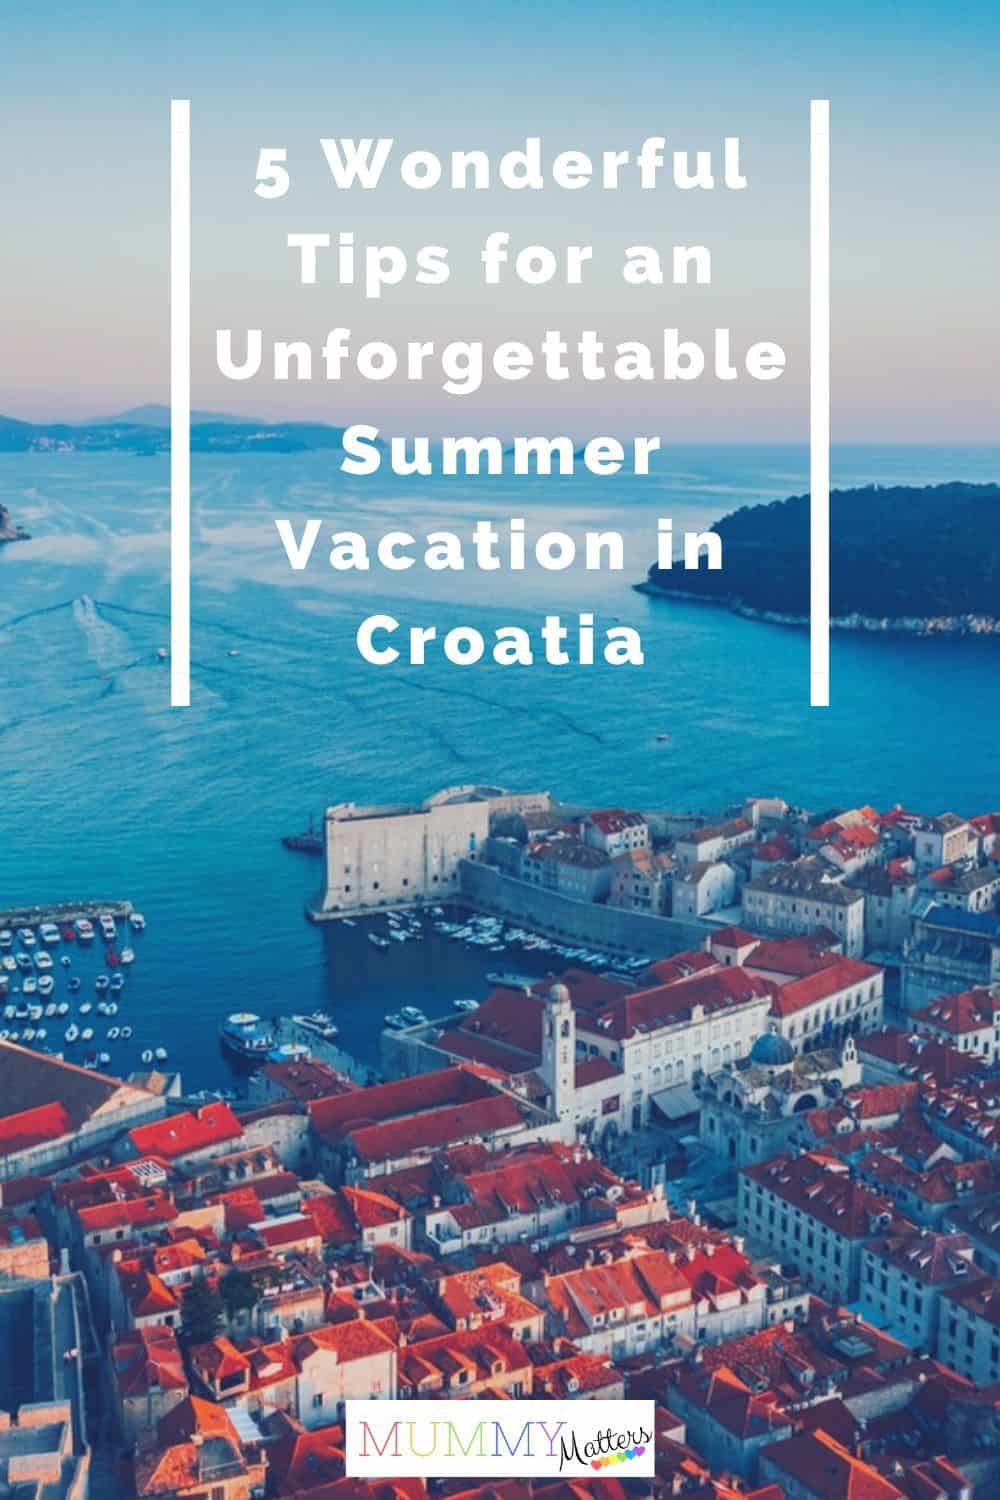 When travelling abroad you have to prepare and organise your itinerary, so here is your travel guide to spending an unforgettable summer vacation in Croatia.